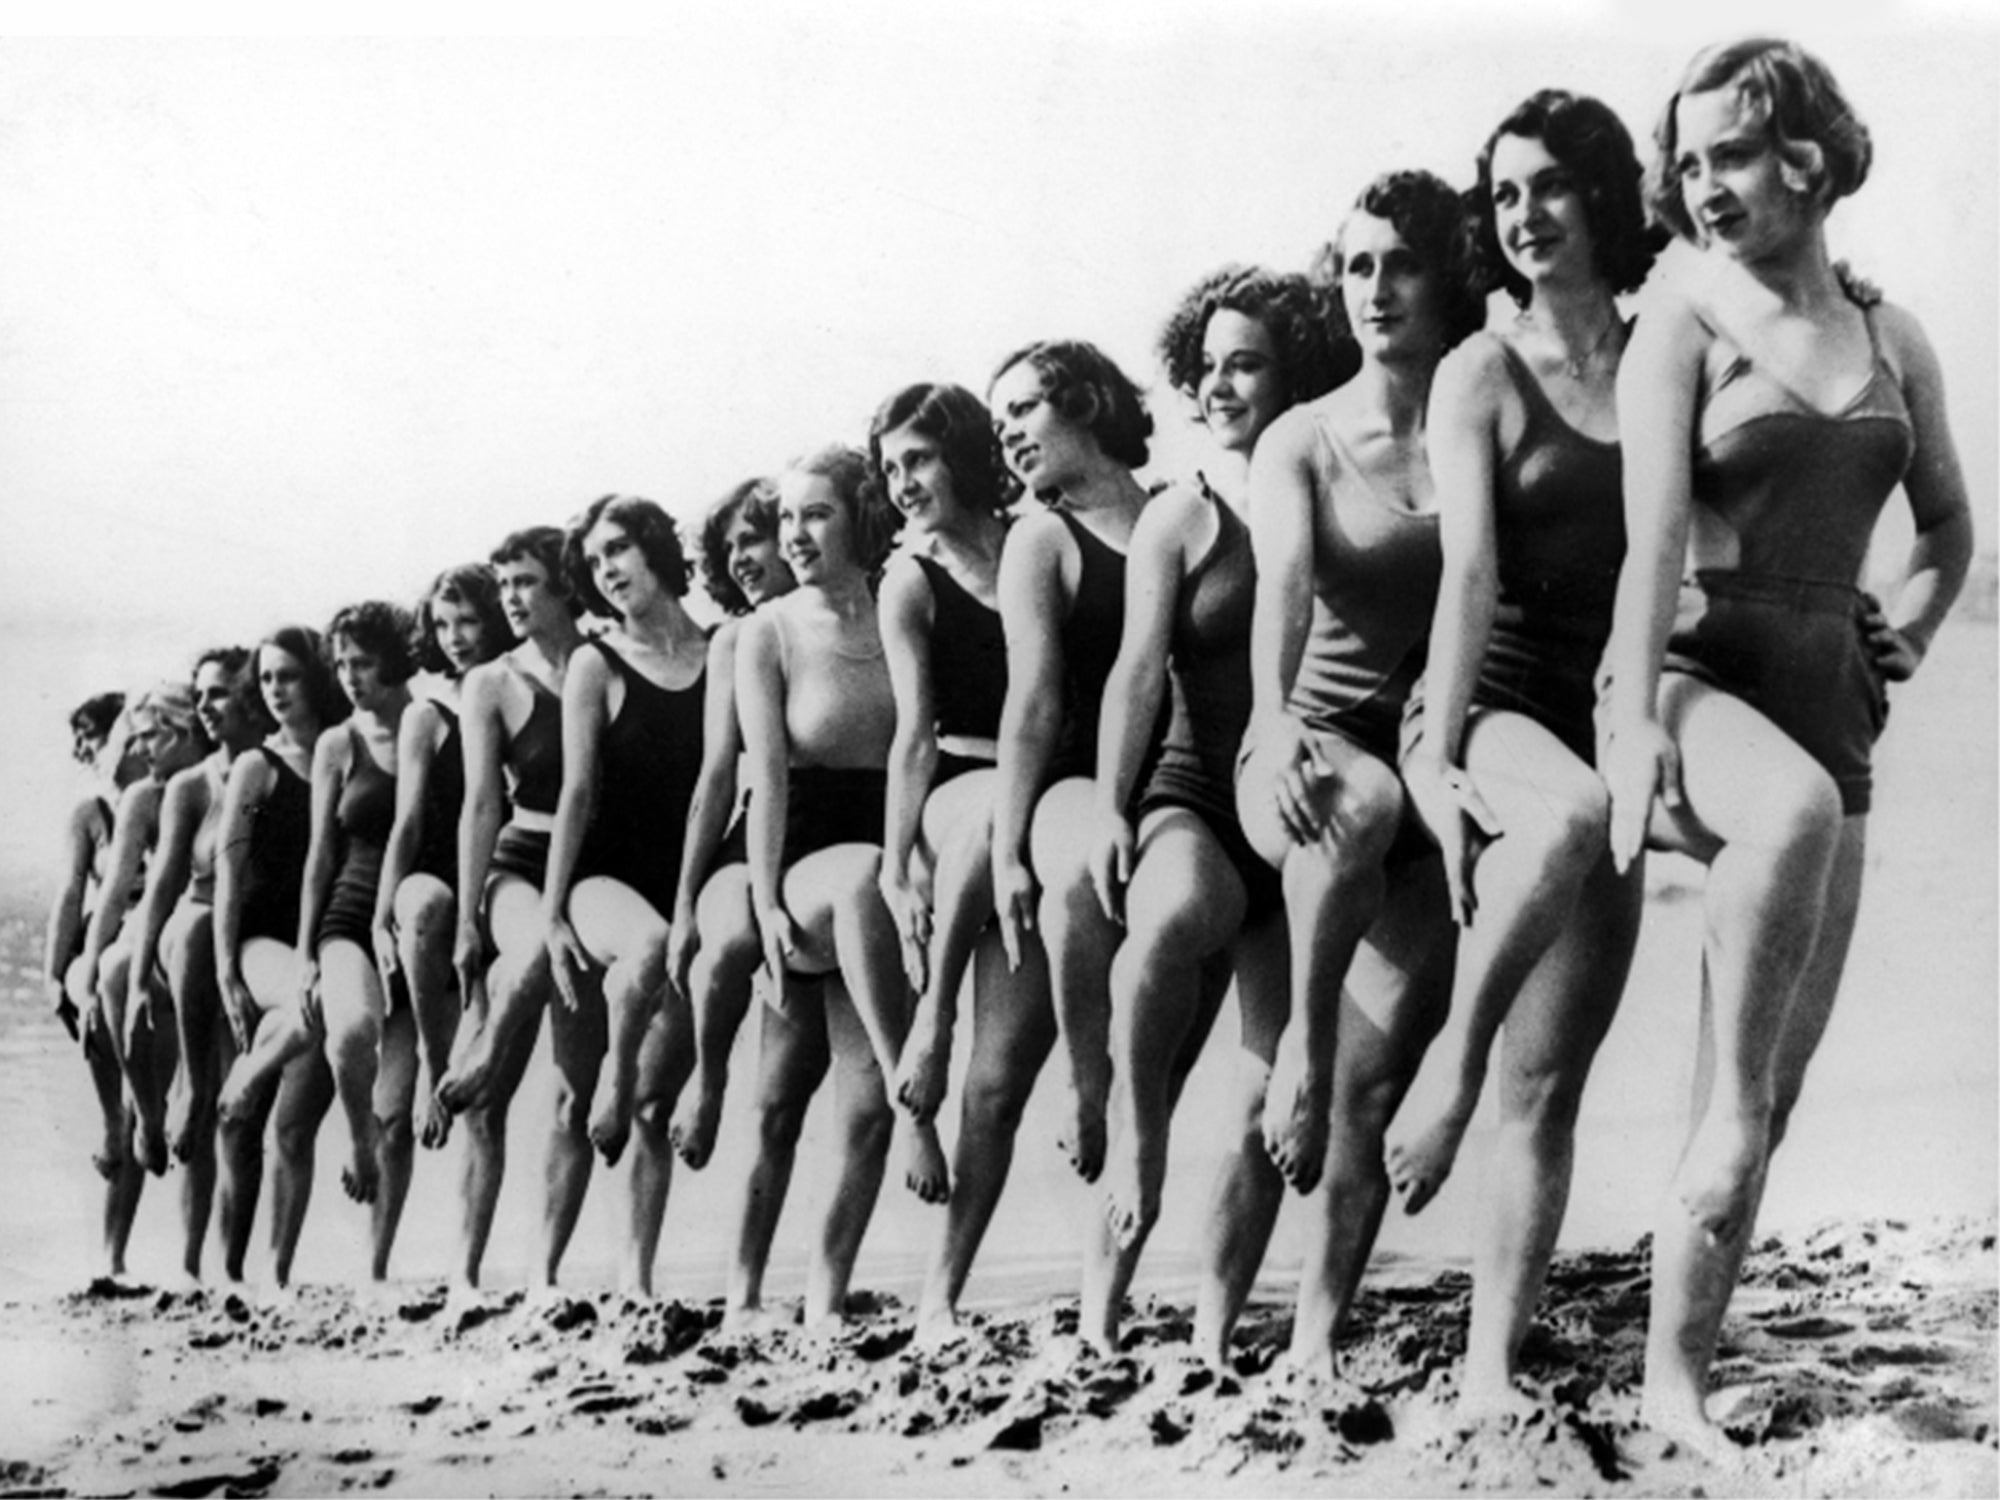 History of Swimsuit - Life in Italy